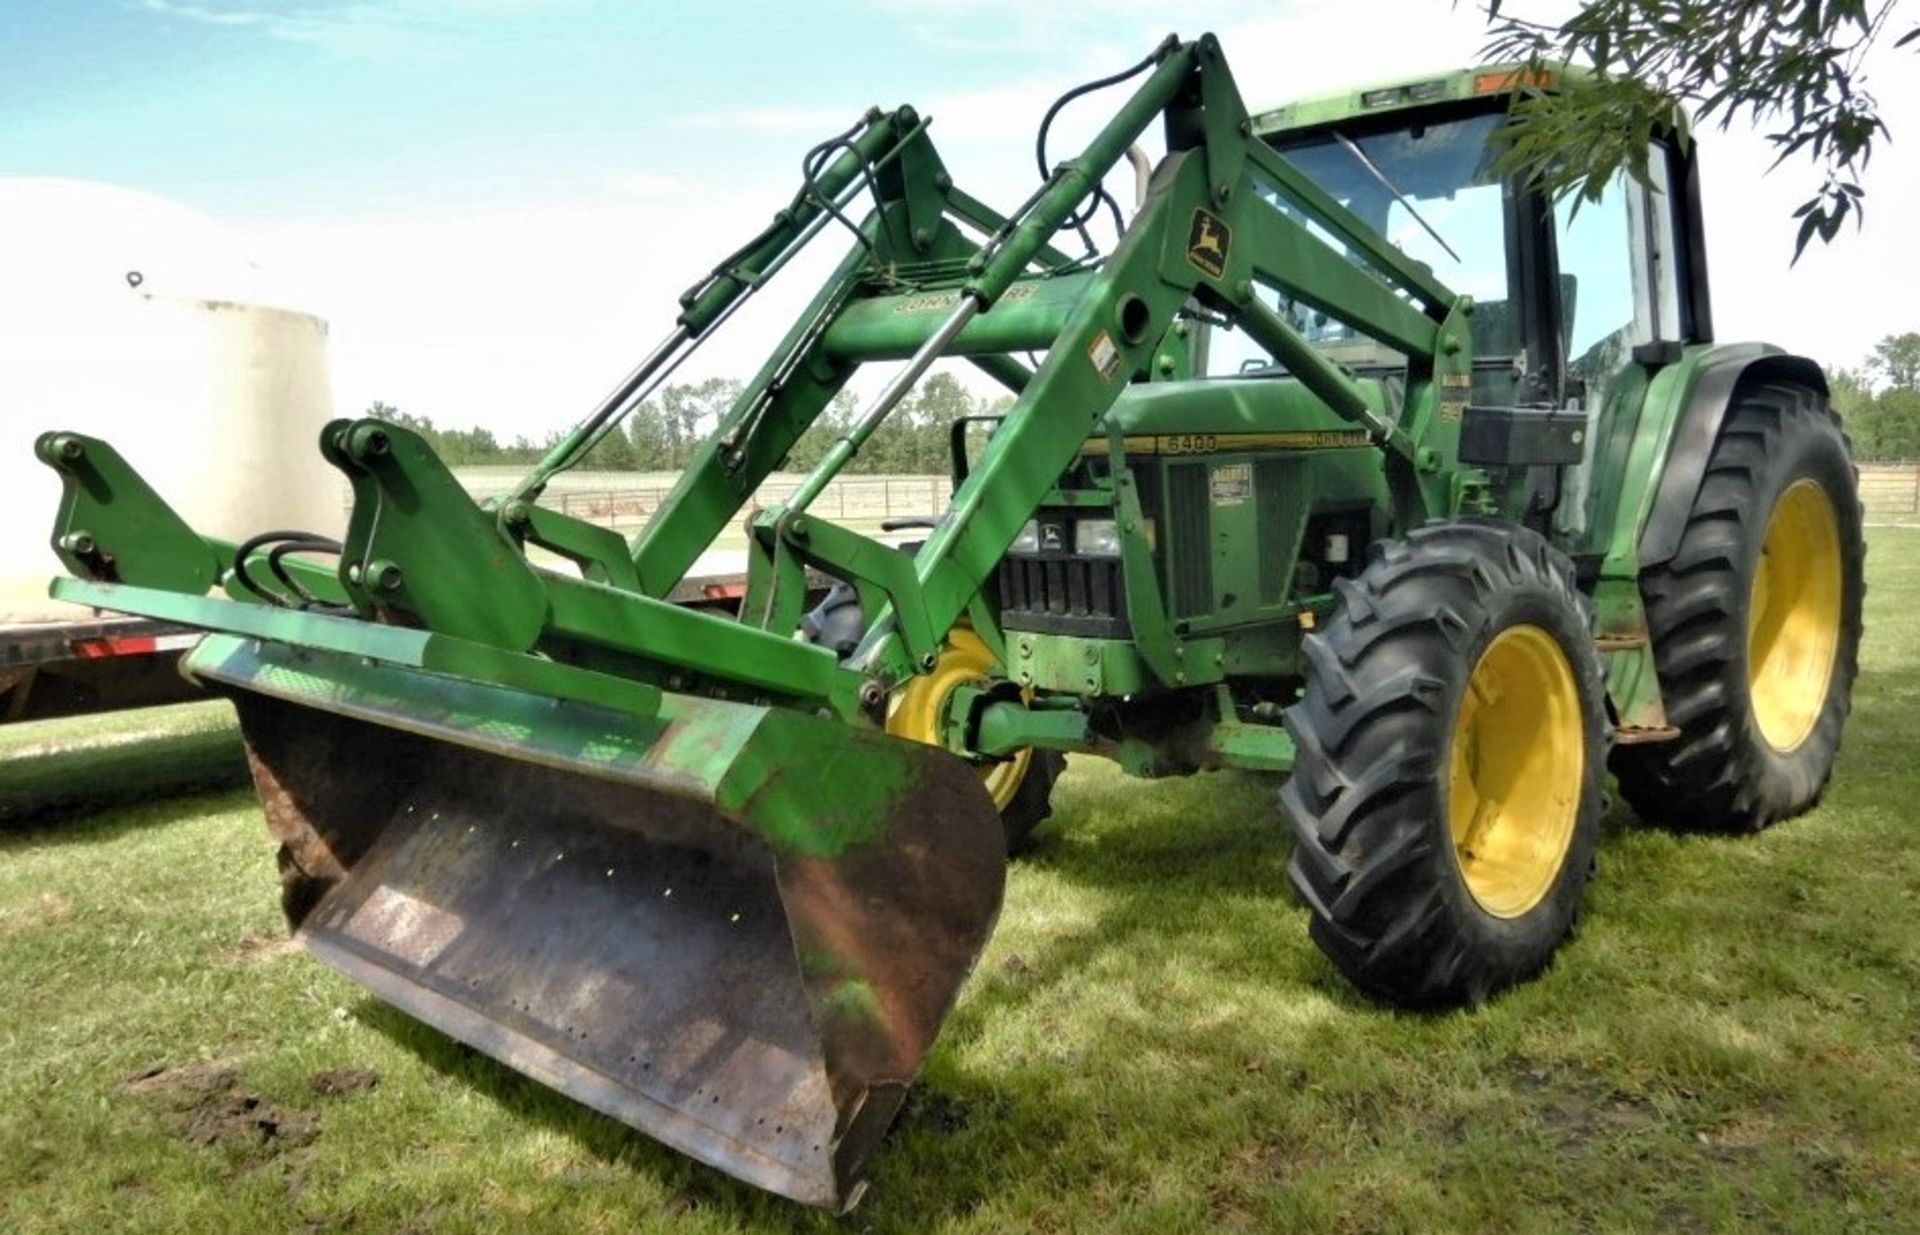 JOHN DEERE 6400 FWA TRACTOR W/FEL, GRAPPLE (GRAPPLE NOT ATTACHED - NO RAM) & 3PT HITCH, 7486 HOURS - Image 2 of 11